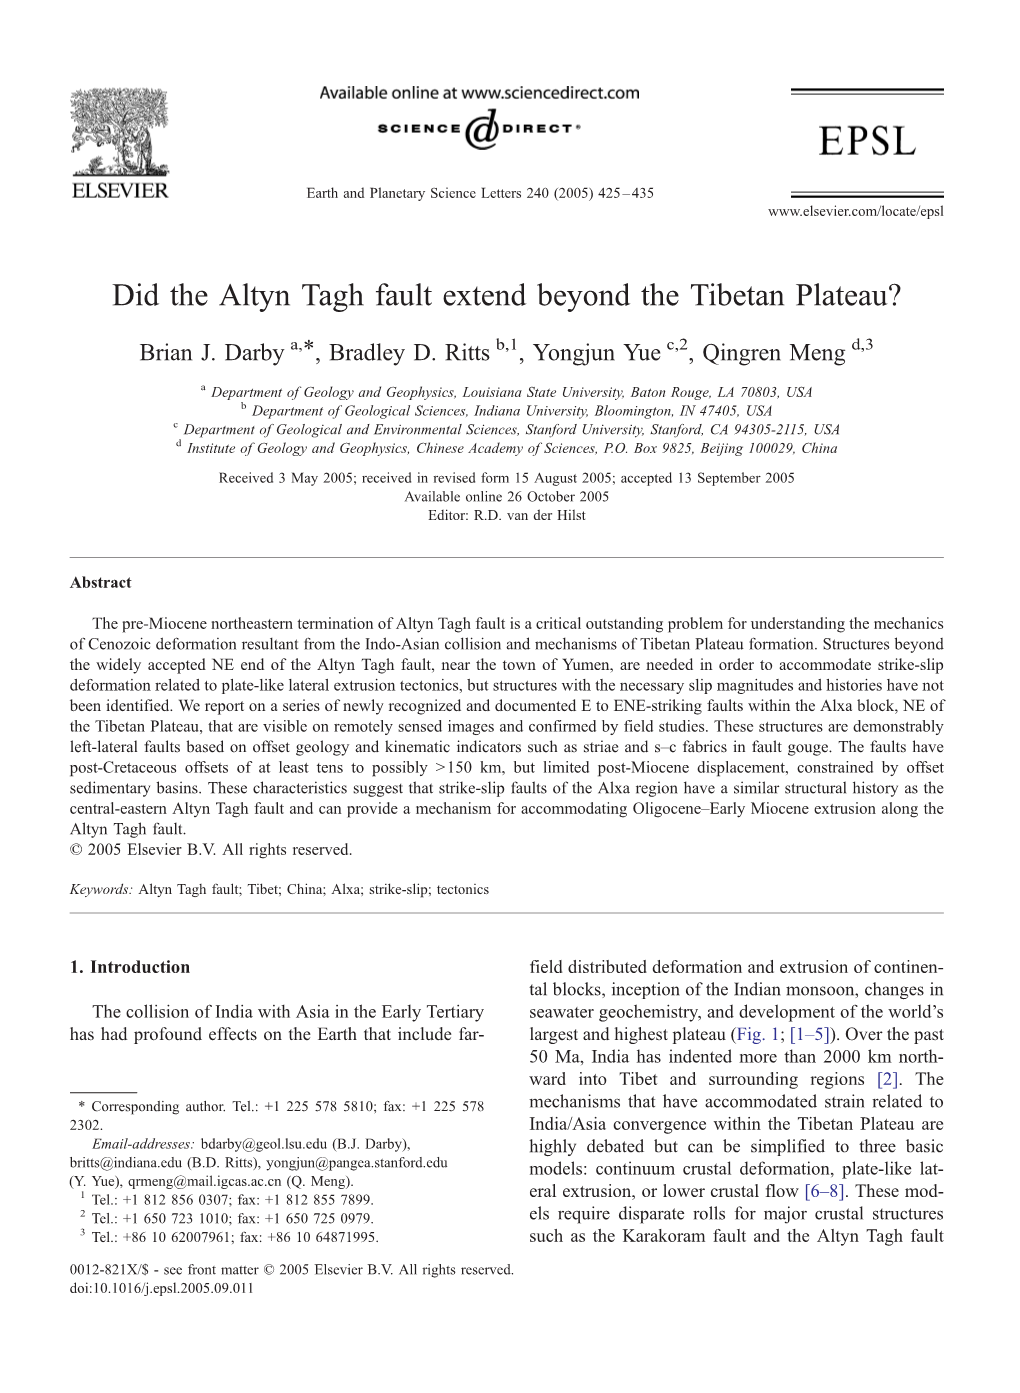 Did the Altyn Tagh Fault Extend Beyond the Tibetan Plateau?